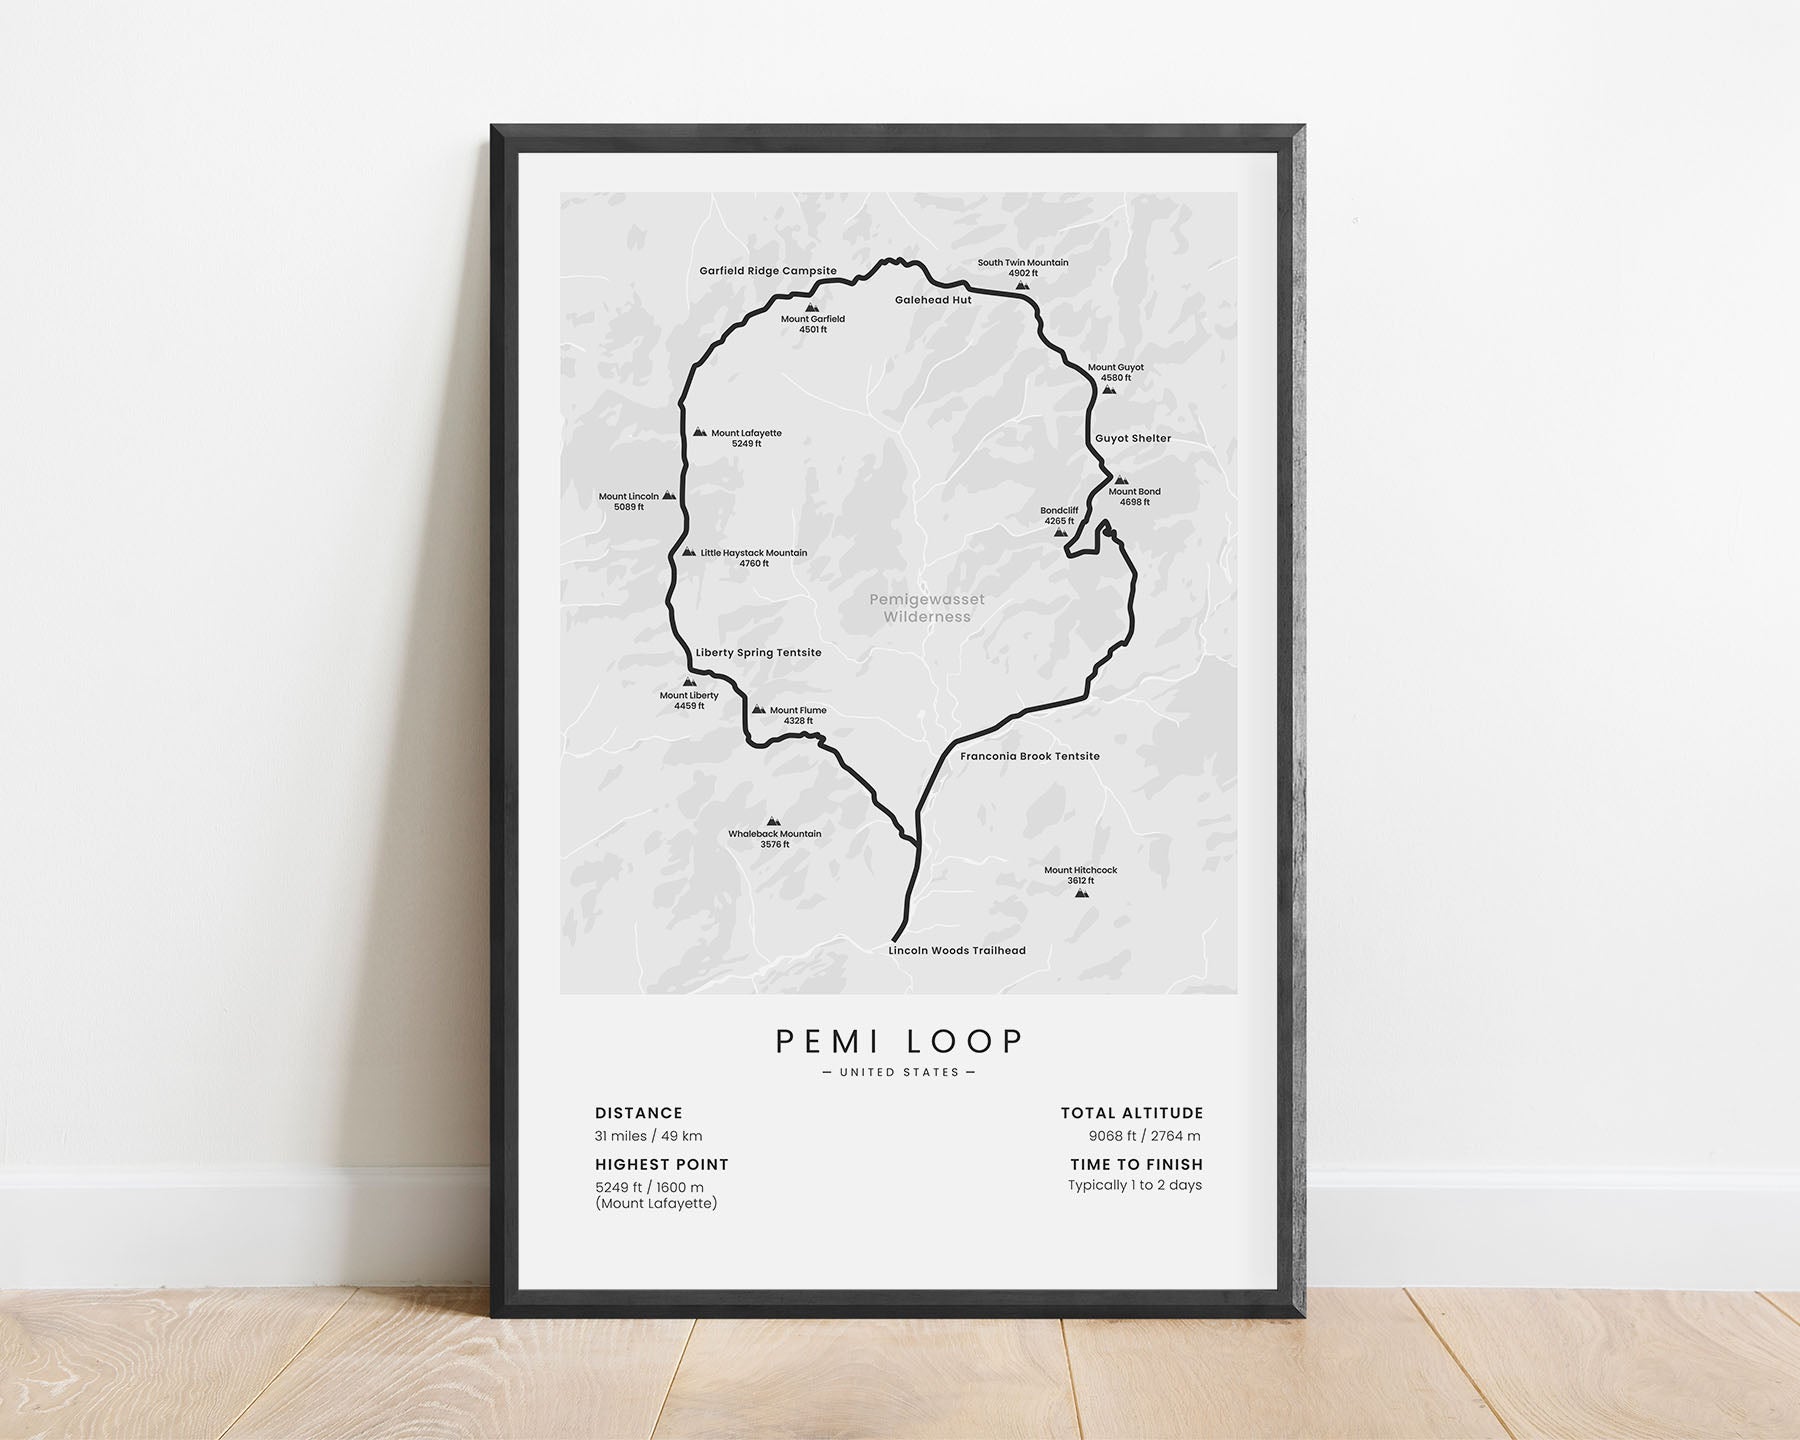 Pemi Loop (White Mountains) Trail Wall Map Art with white background